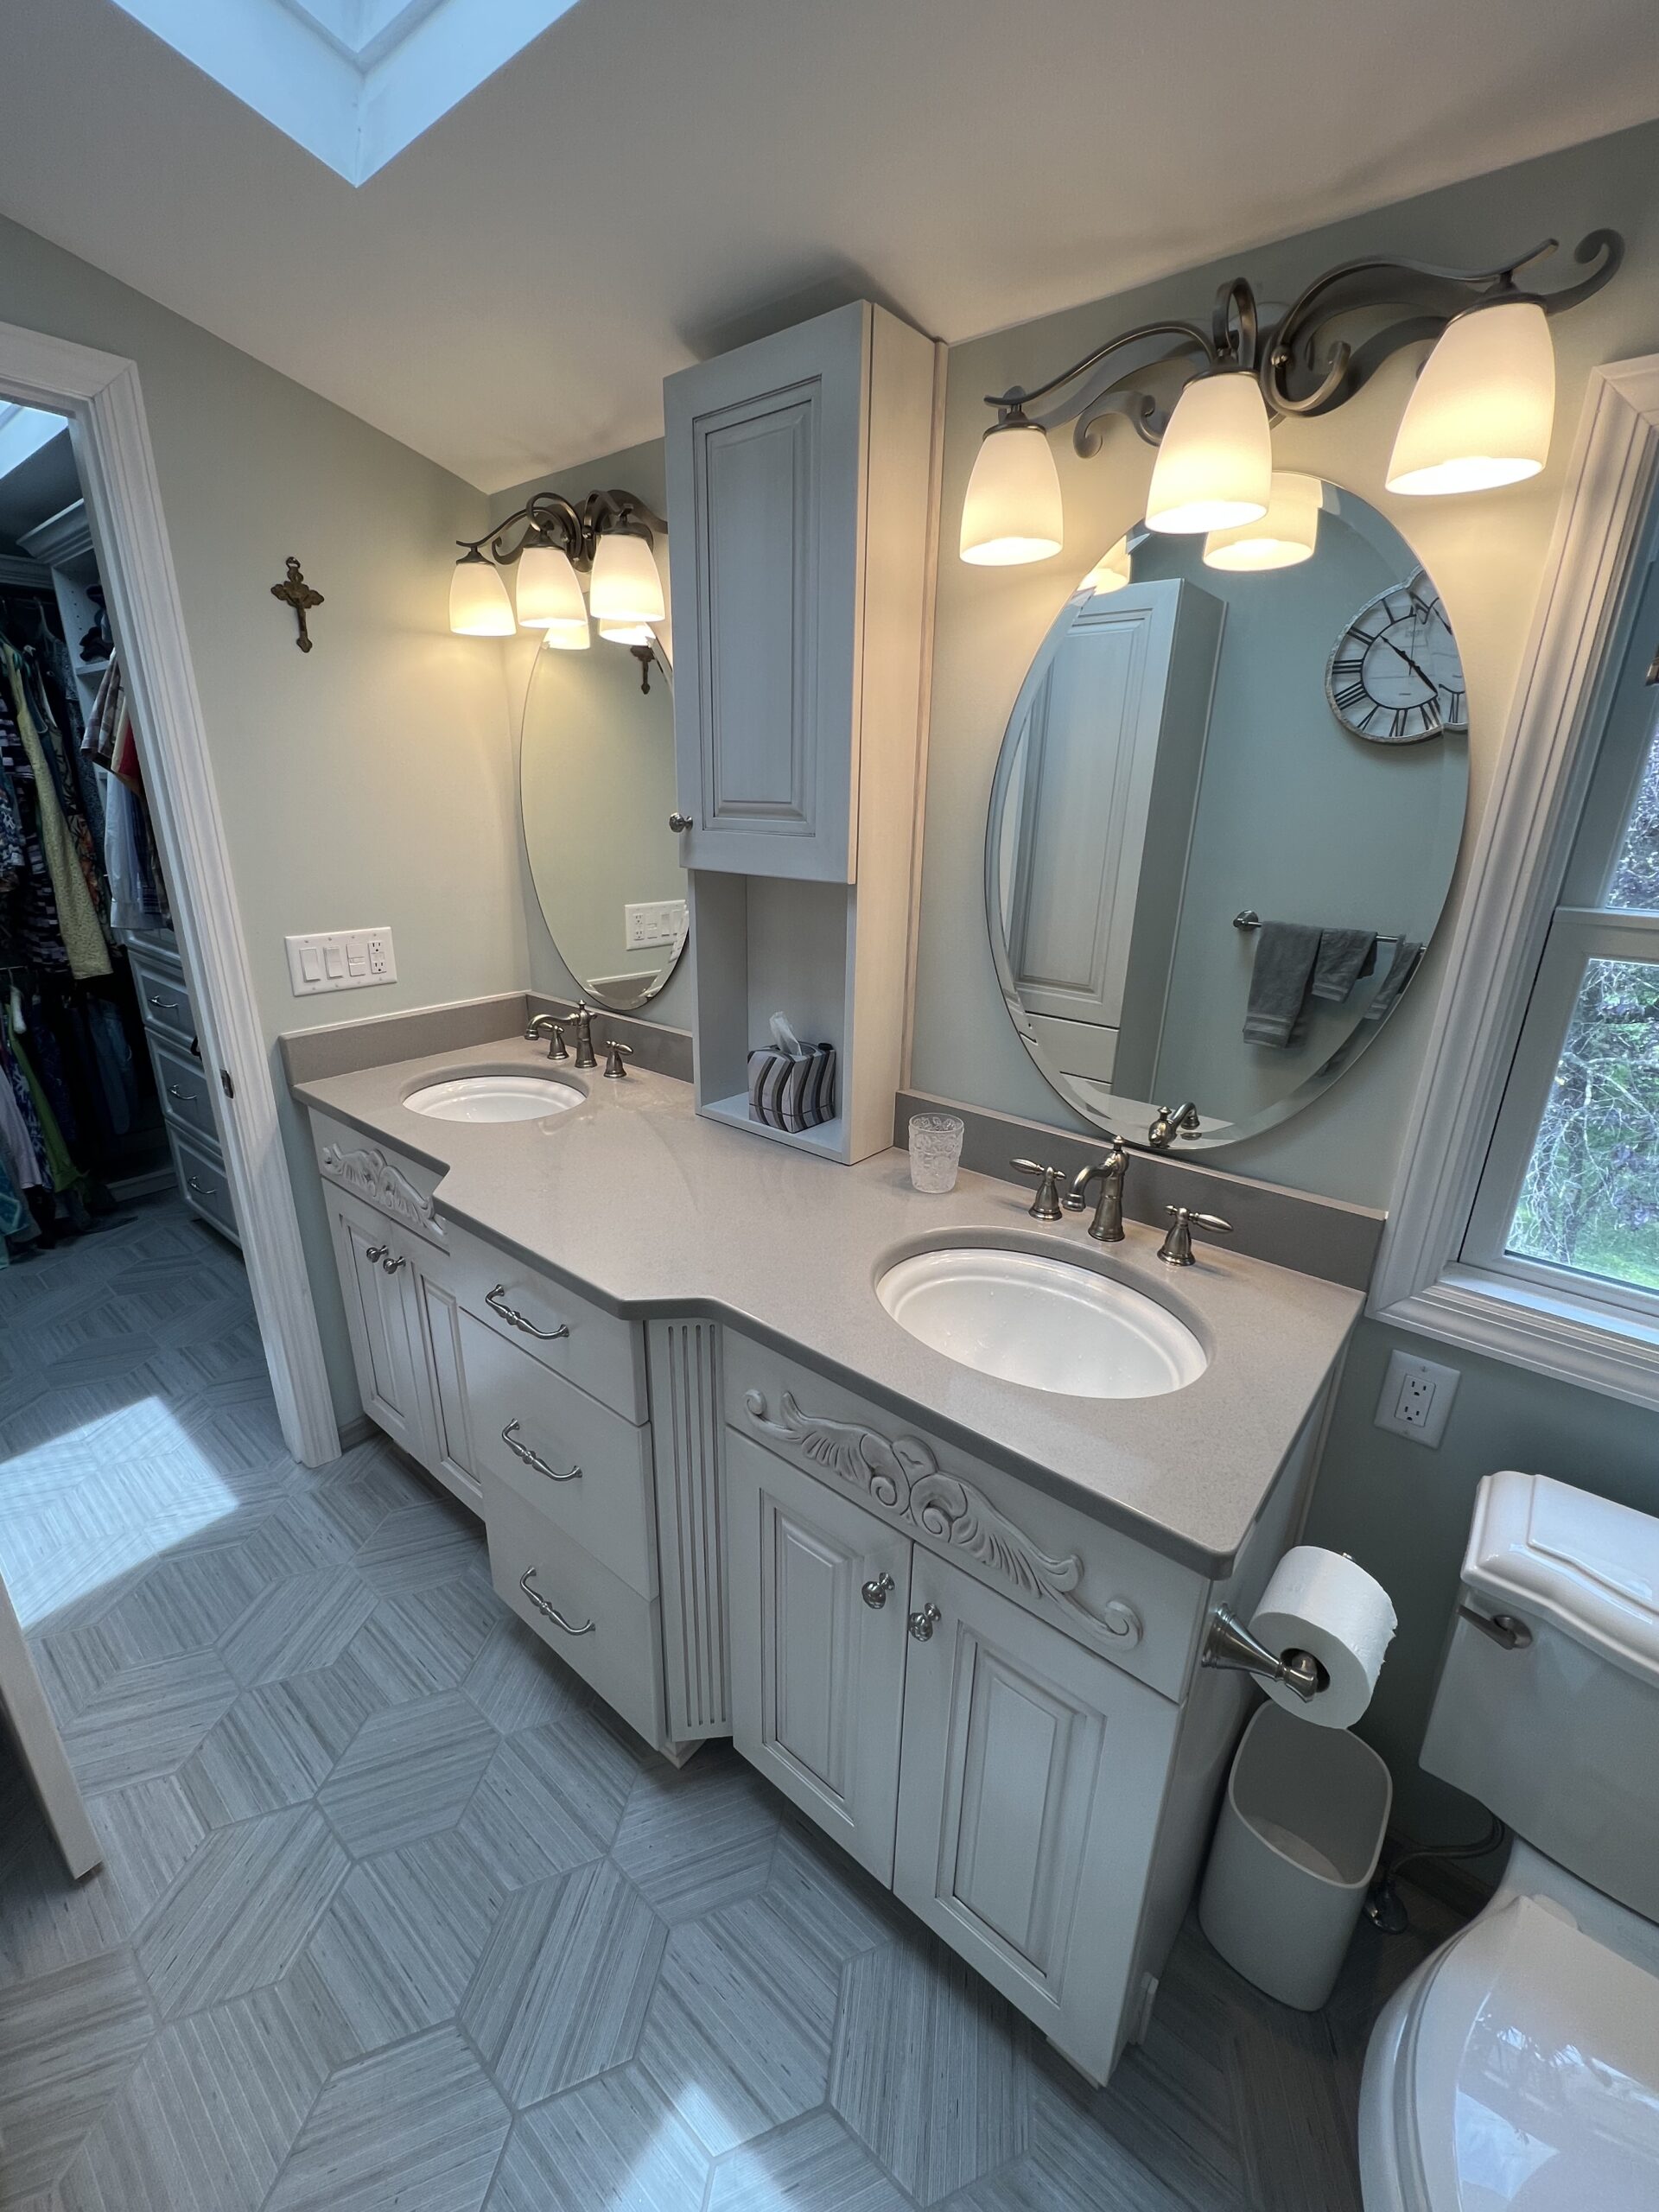 Traditional bathroom, vintage double sink, grey marble countertop, two round-shaped mirrors, window, toilet